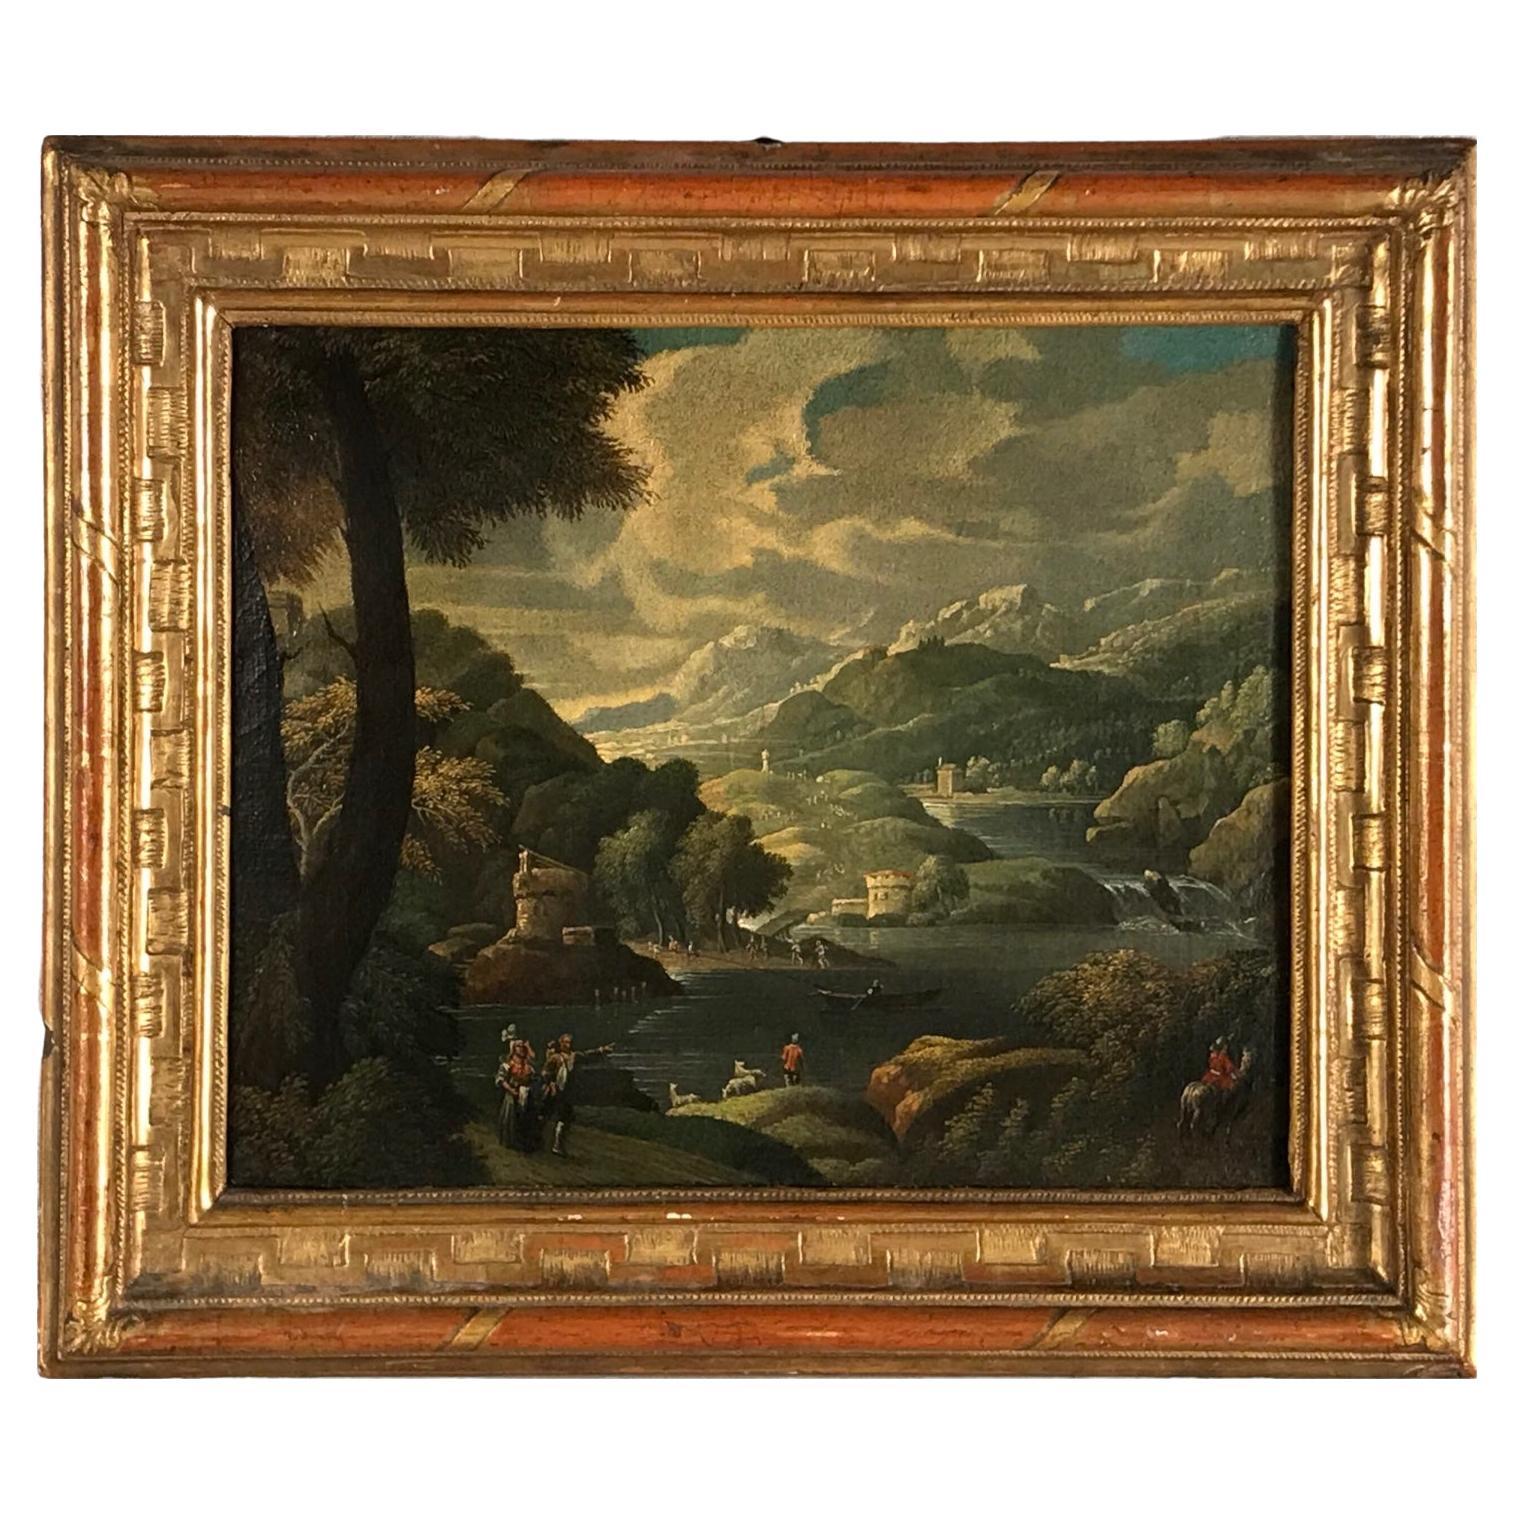 Old Master Painting, Flemish or German School 17th-18th century